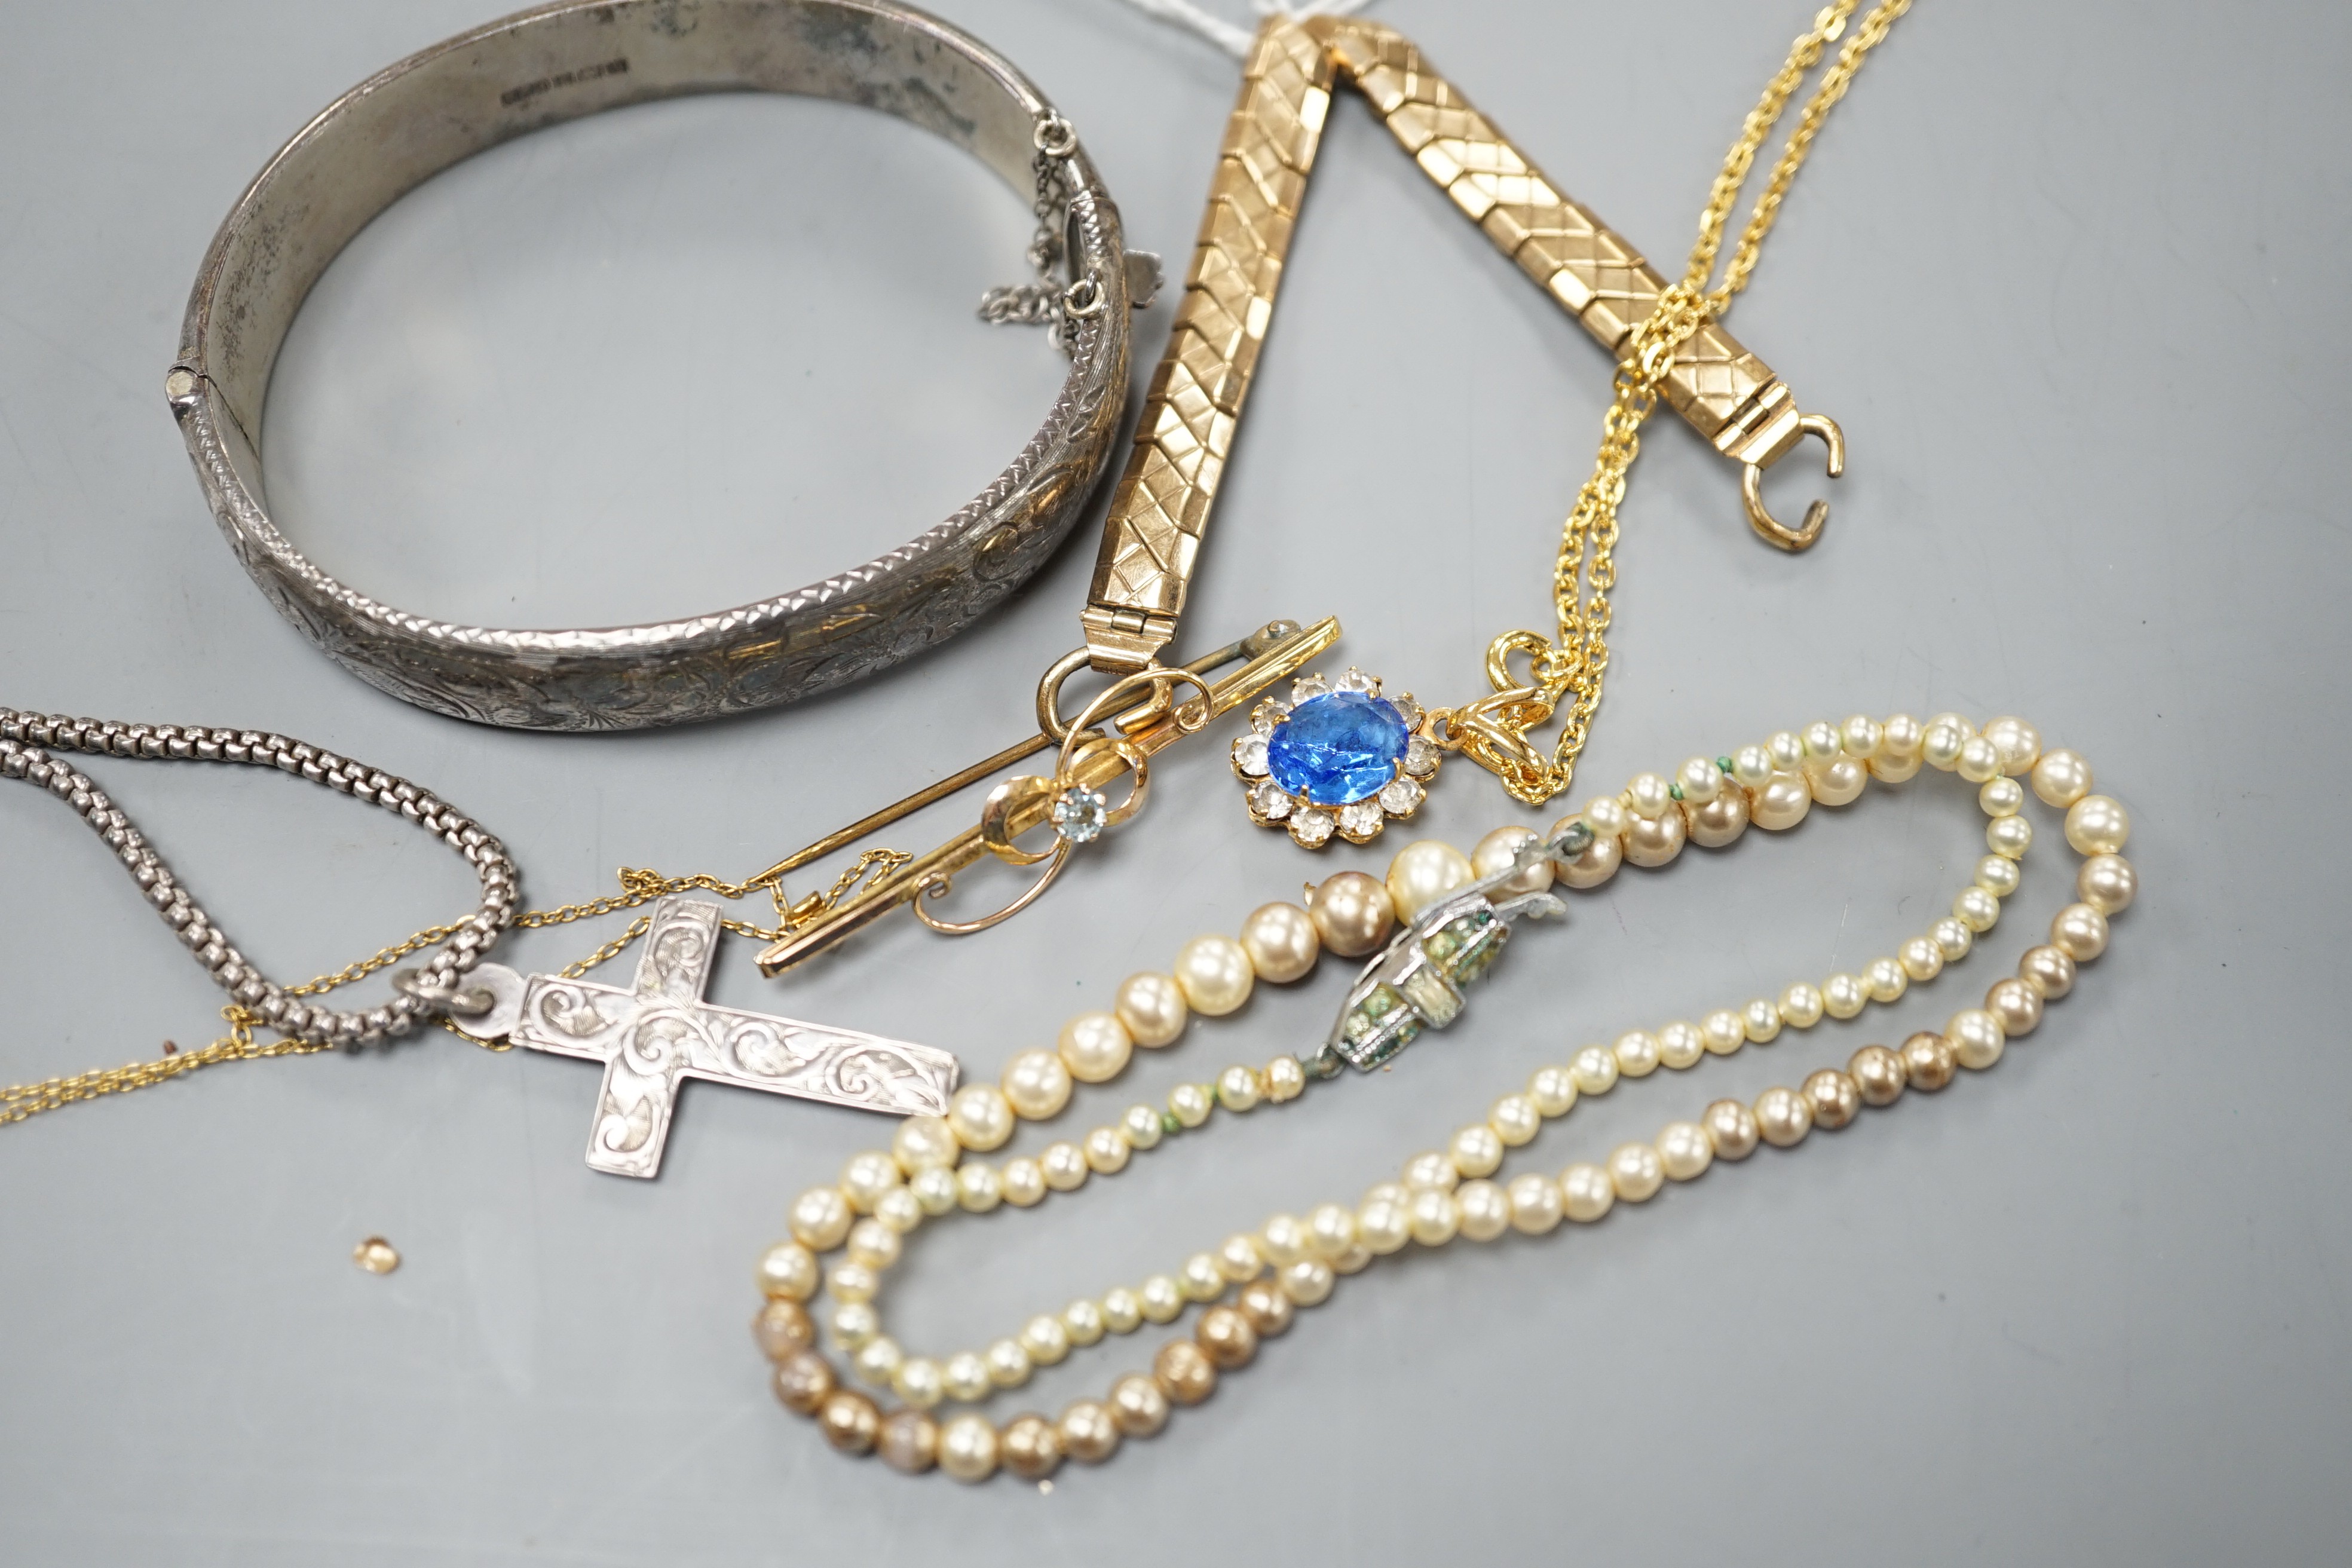 A 9ct gold flexible watch strap, a 9ct and gem set bar brooch and a 9k fine link chain, gross weight 12.1 grams and four other items of jewellery including a silver hinged bangle and simulated pearl necklace.